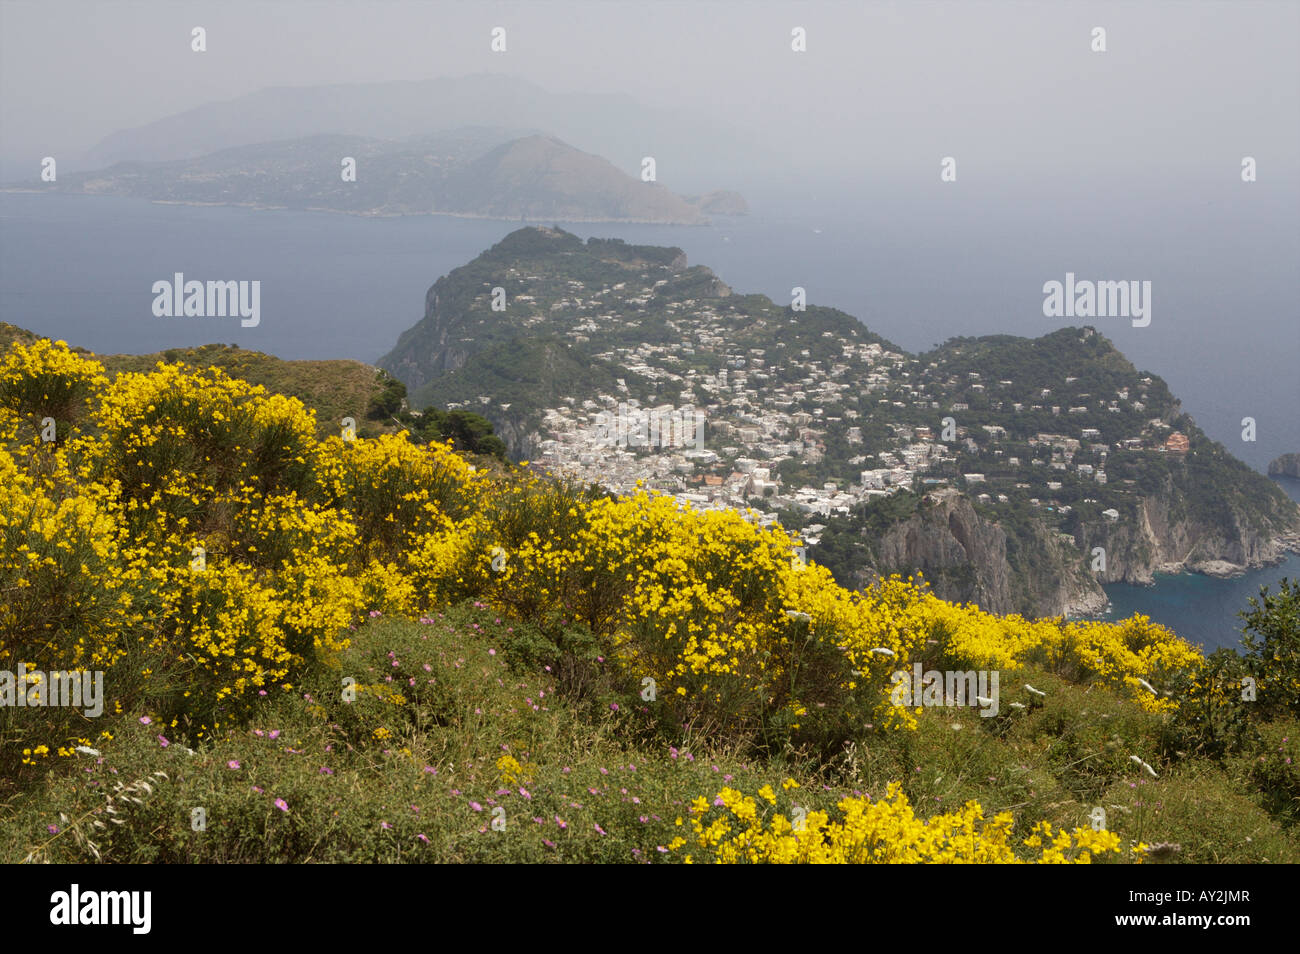 The view of the village of Capri on the Isle of Capri from the cable car at Anacapri in the mountains Stock Photo